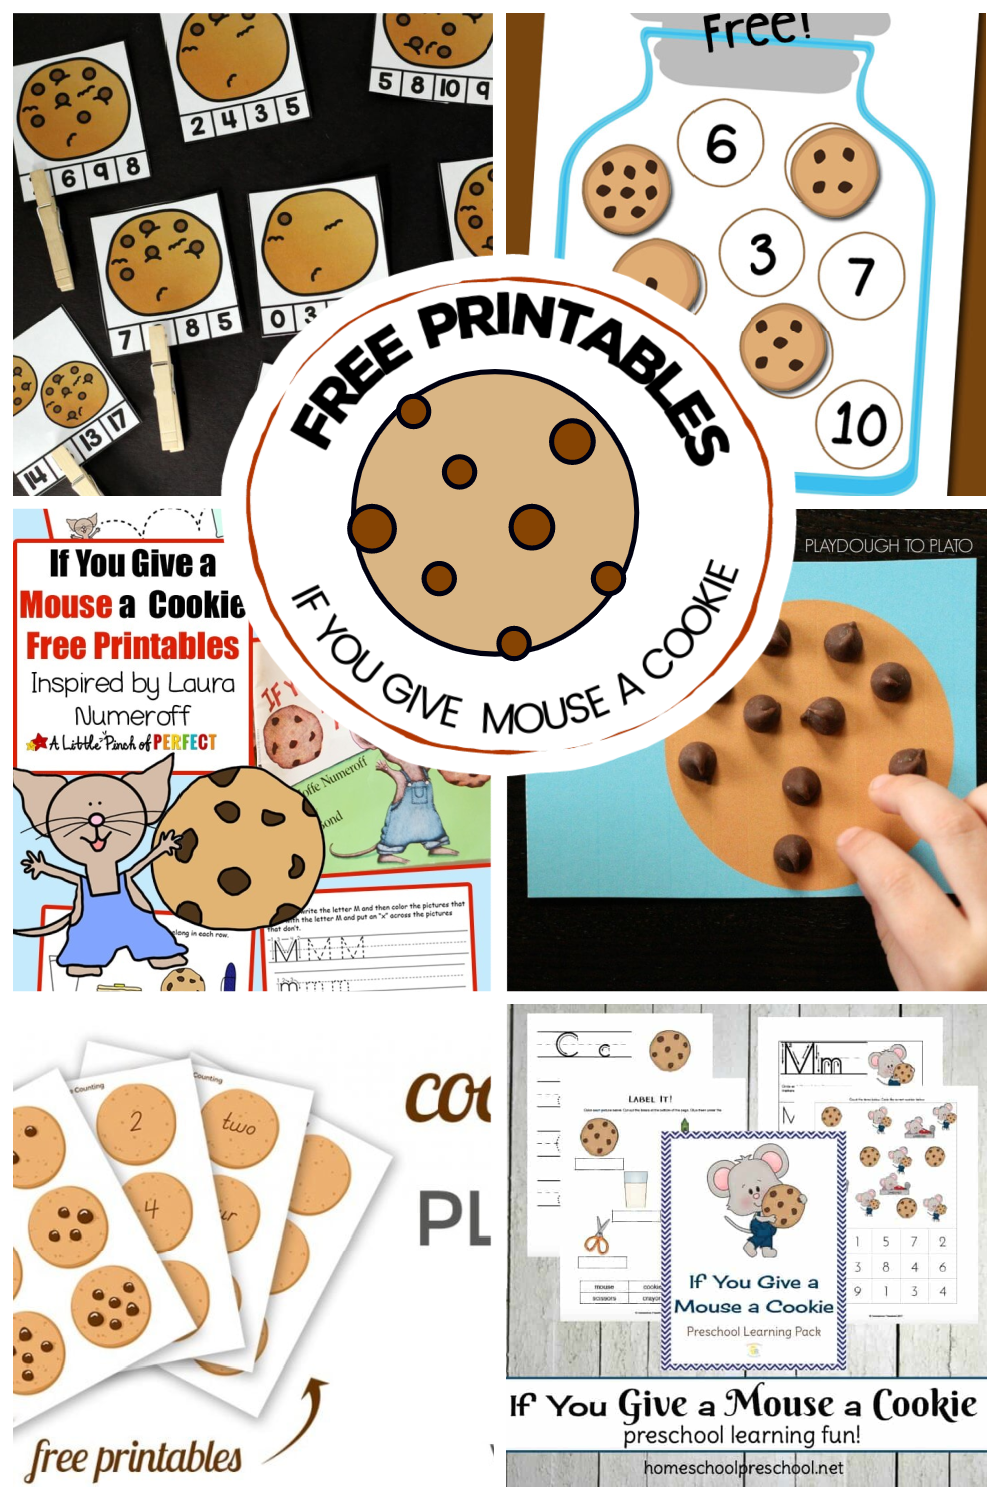 if-you-give-a-mouse-a-cookie-free-printables If You Give a Mouse a Cookie Printables